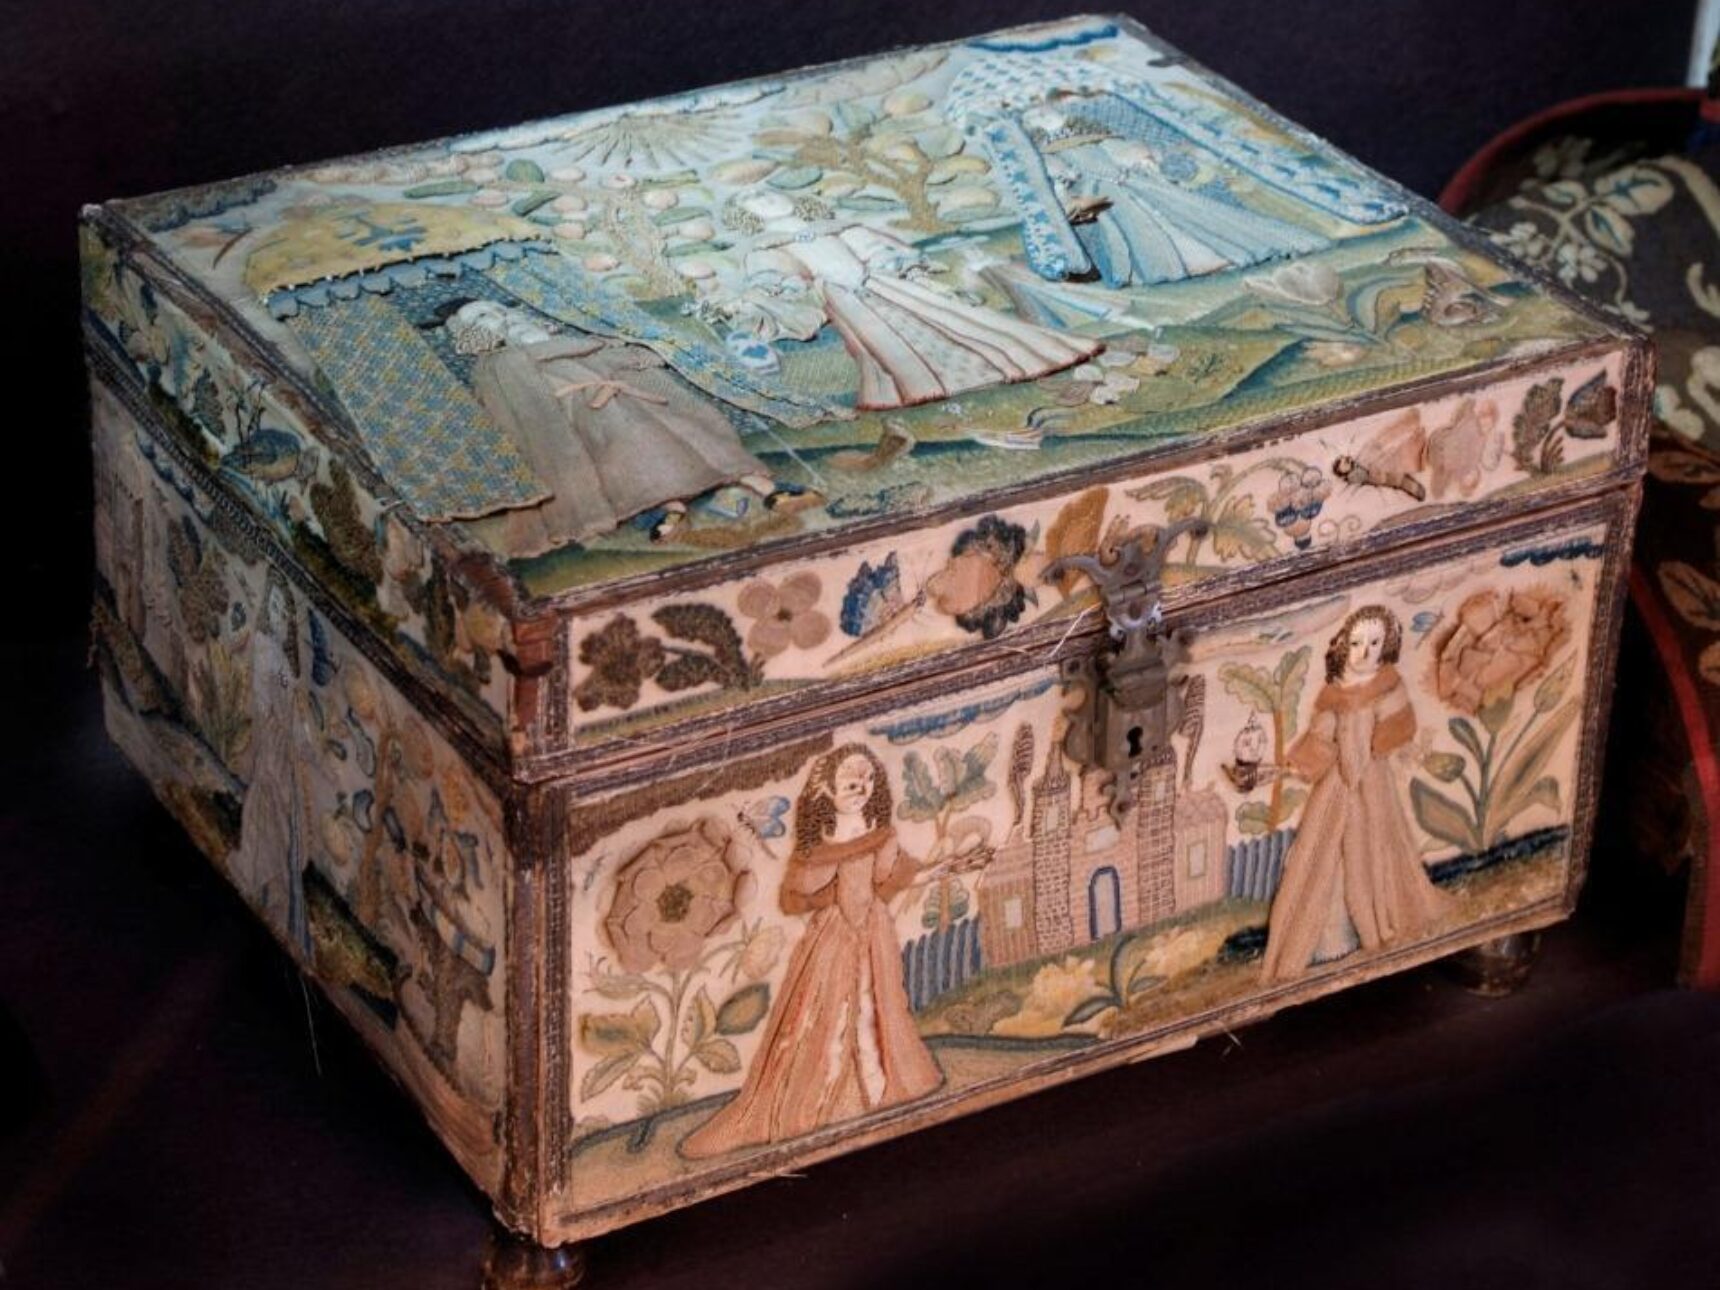 An incredibly rare, 17th century Stumpwork casket is an exquisite example of needlework and part of the Sudeley collection